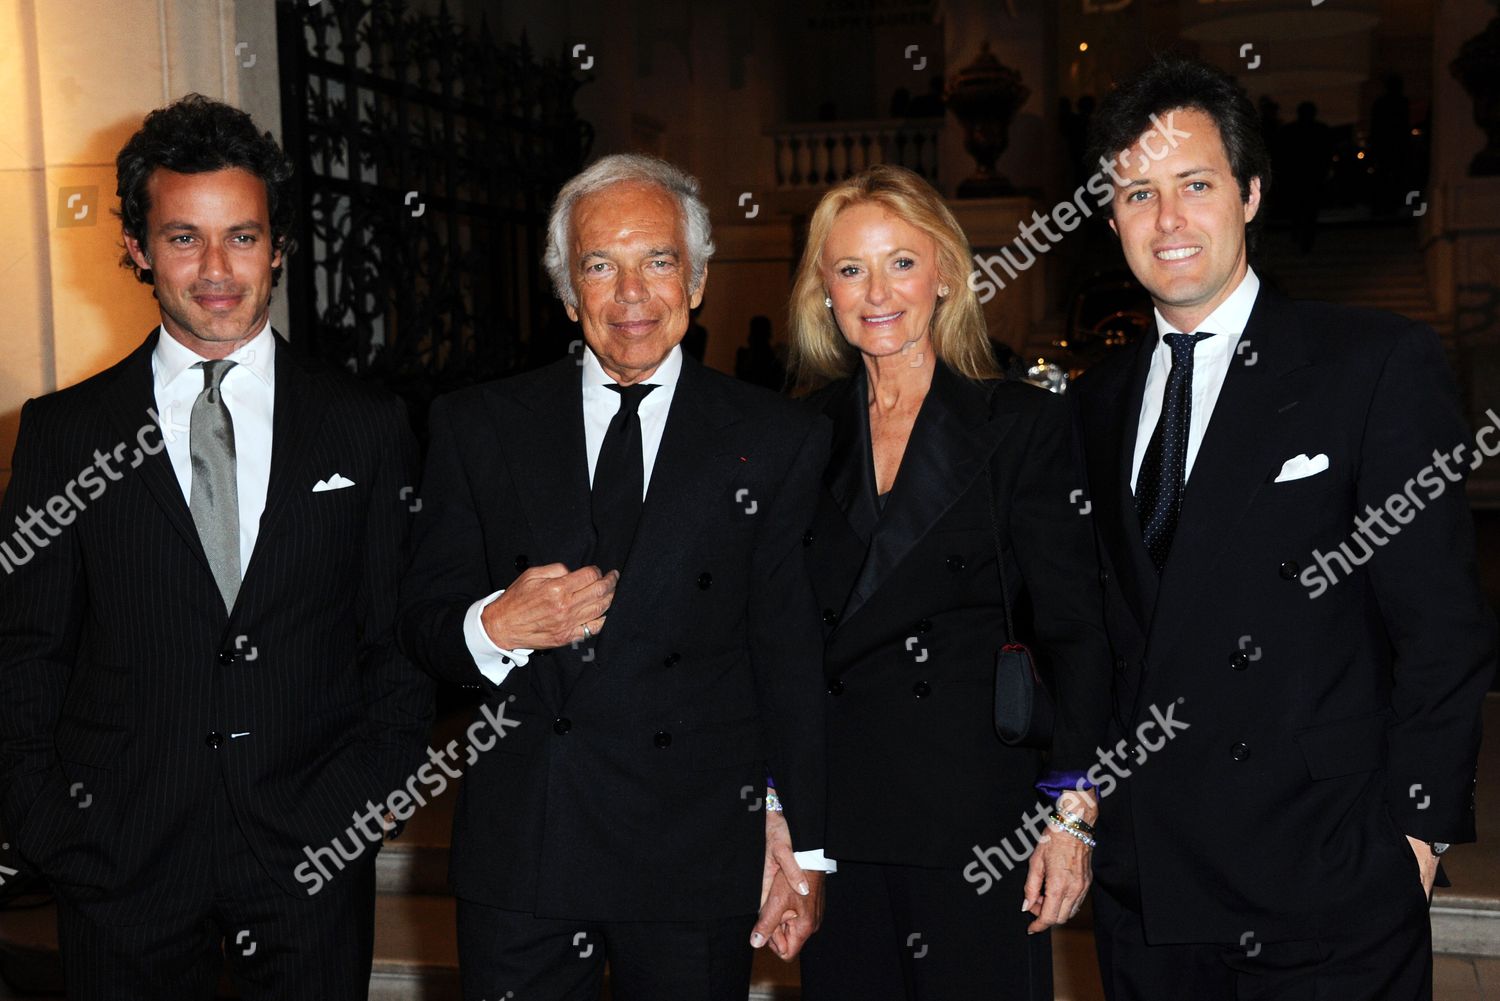 Who Is Ralph Lauren's Wife? All About Ricky Lauren